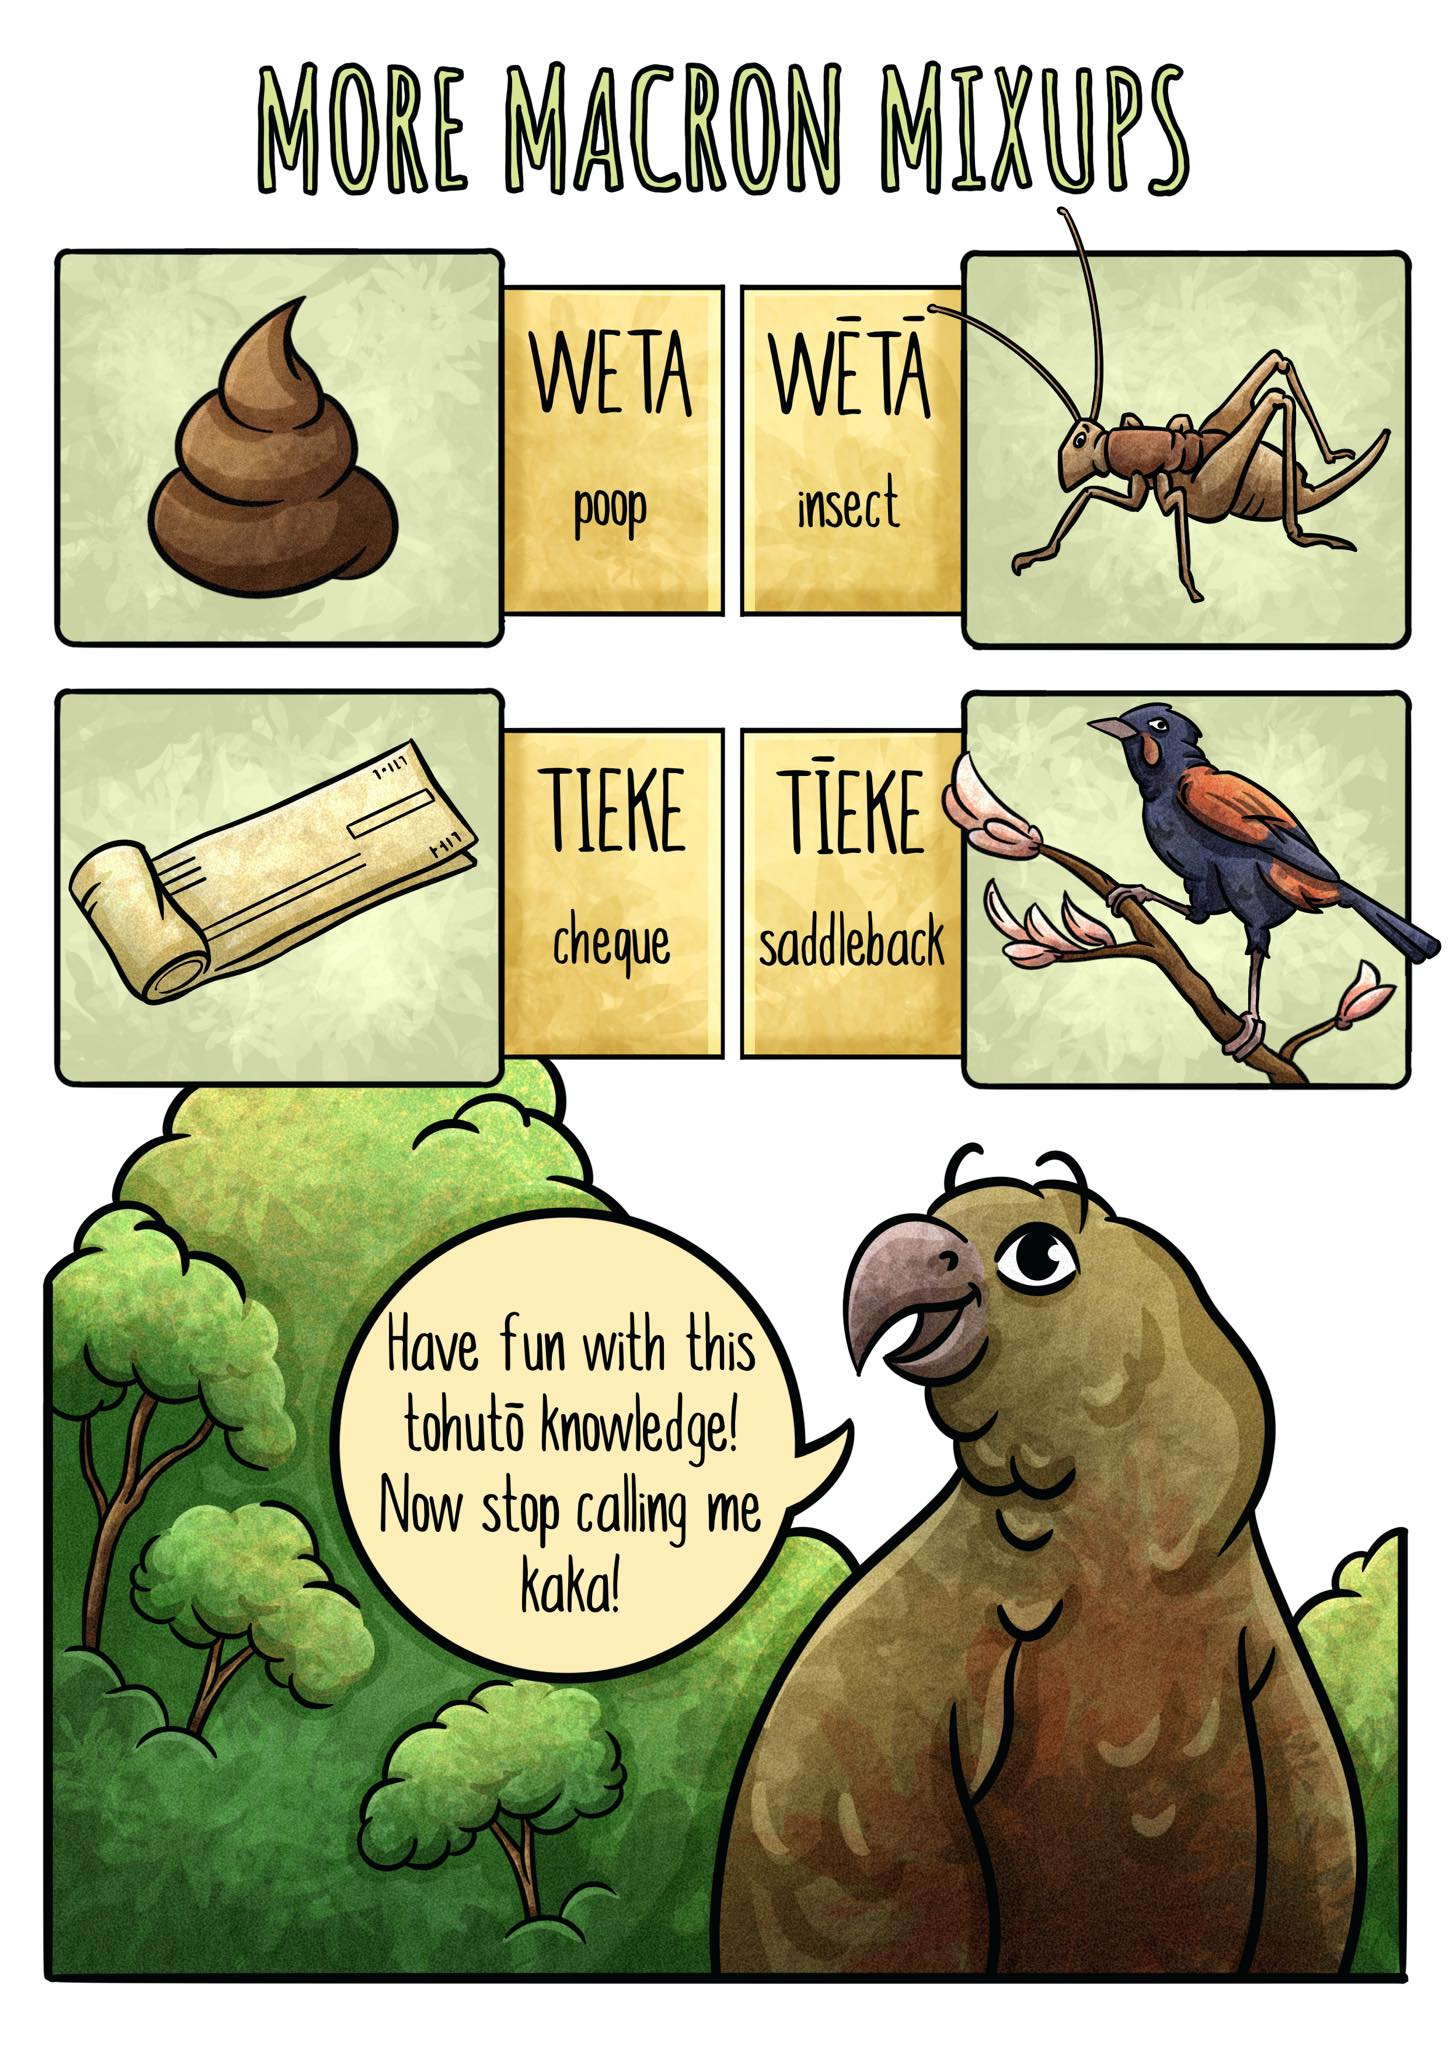 More mixups. Showing side by side weta (poop) vs wētā (insect). Tieke (cheque) vs tīeke (saddleback bird).